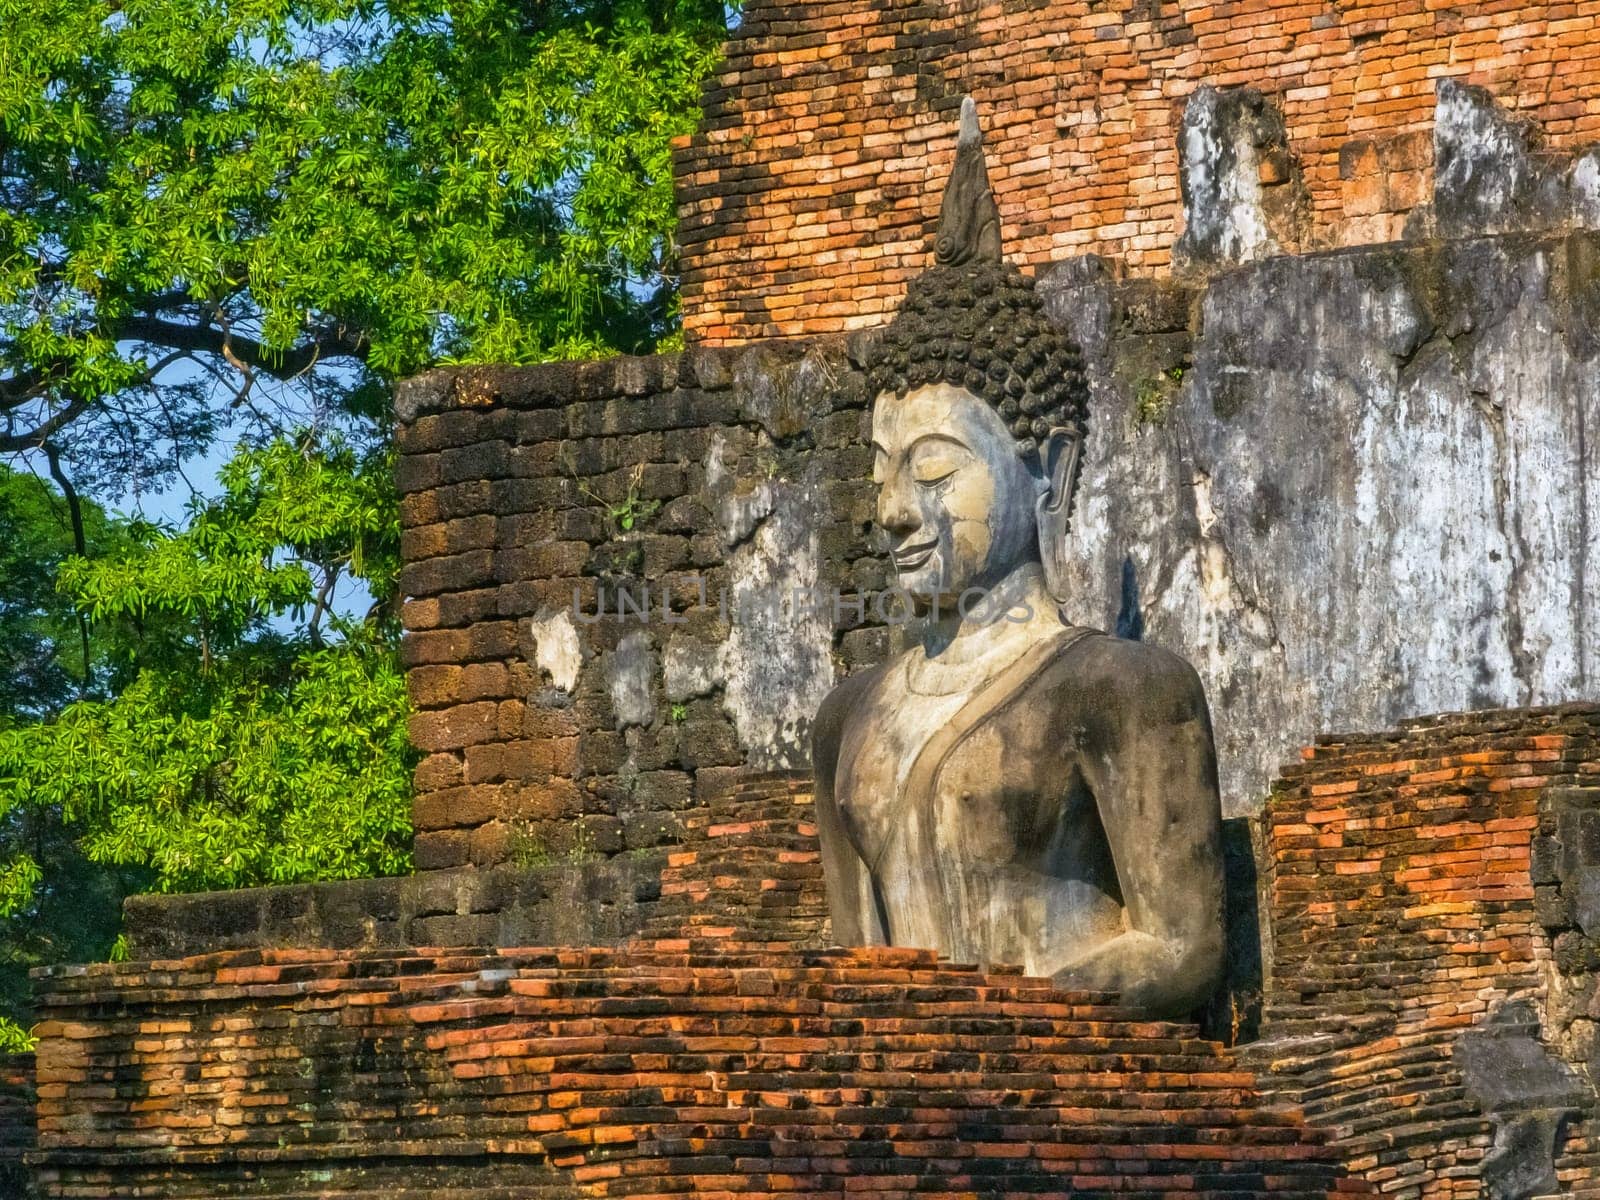 Buddha at Wat Mahathat temple in Sukhothai historical park by day, UNESCO World Heritage Site, Thailand